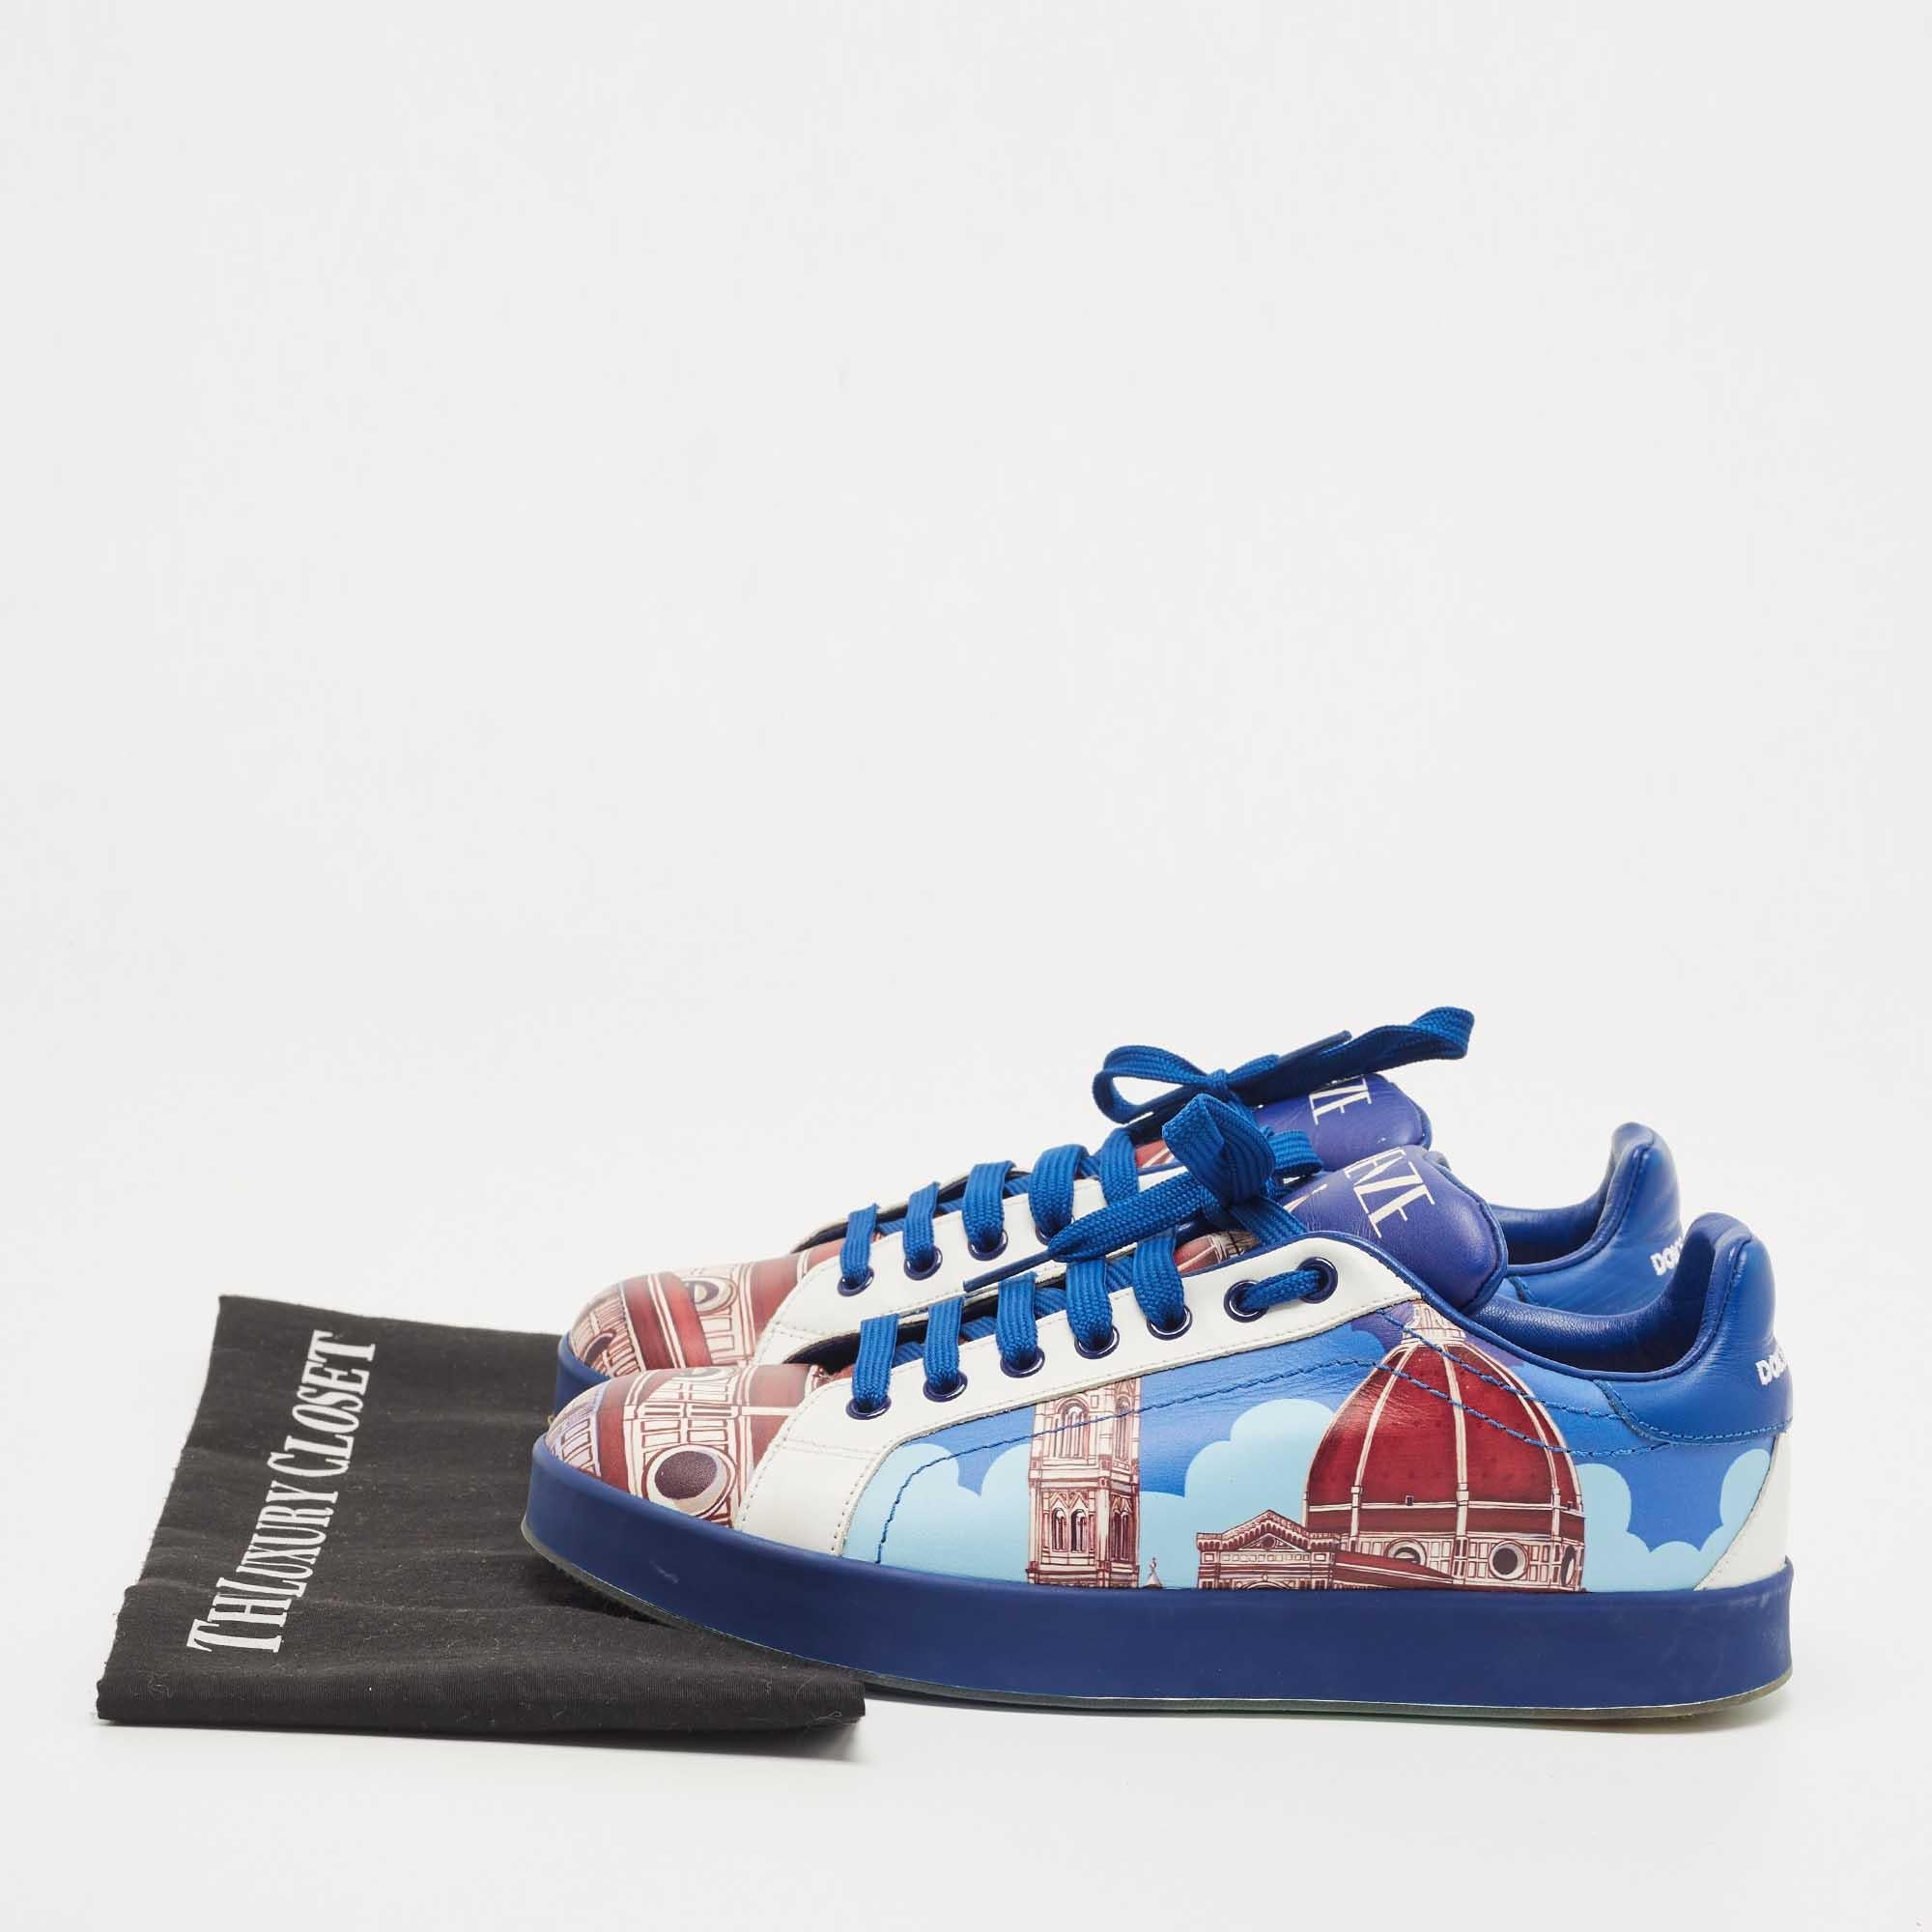 Dolce & Gabbana Tricolor Printed Leather Low Top Sneakers Size 39.5 5